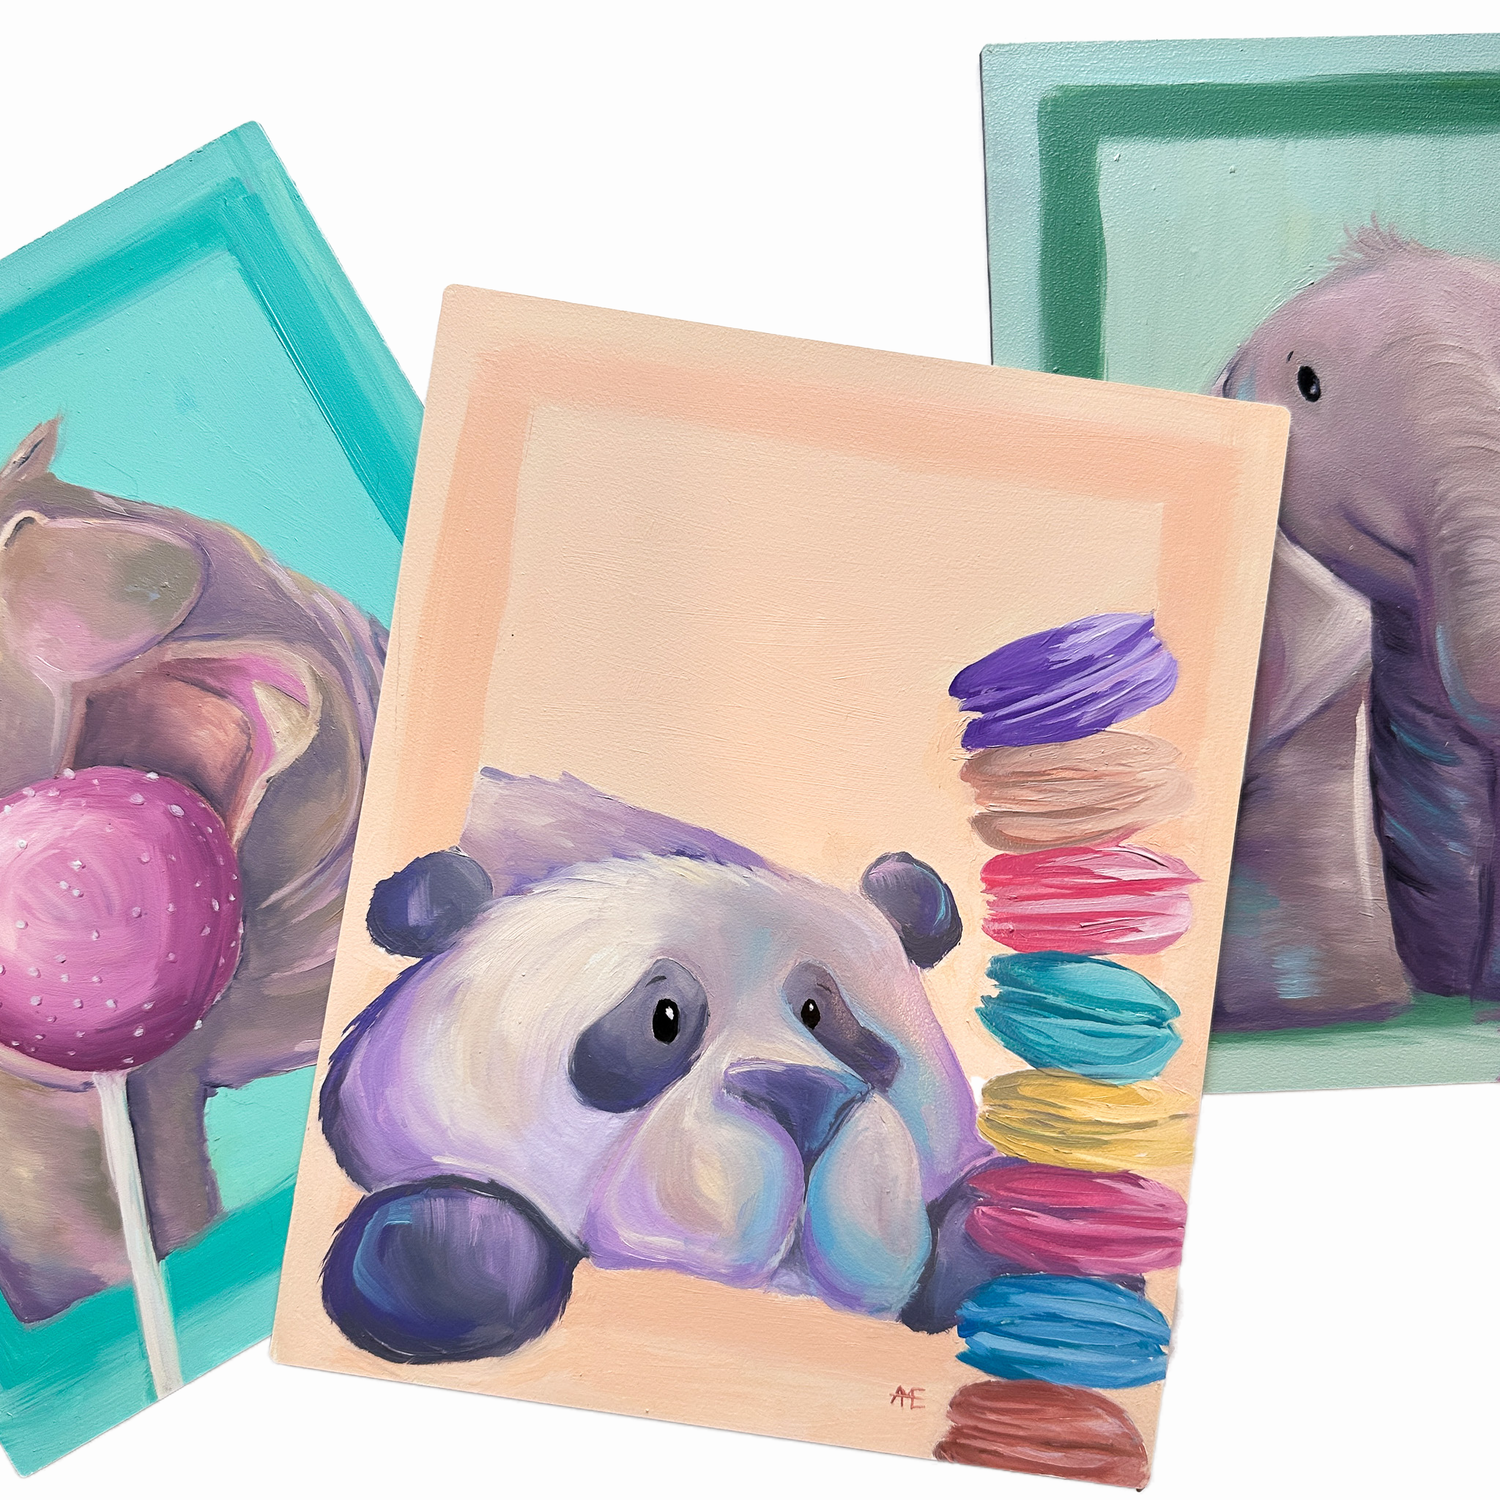 three paintings, a panda and macarons in the middle with peach background, an elephant to the right and partial hippo to the left